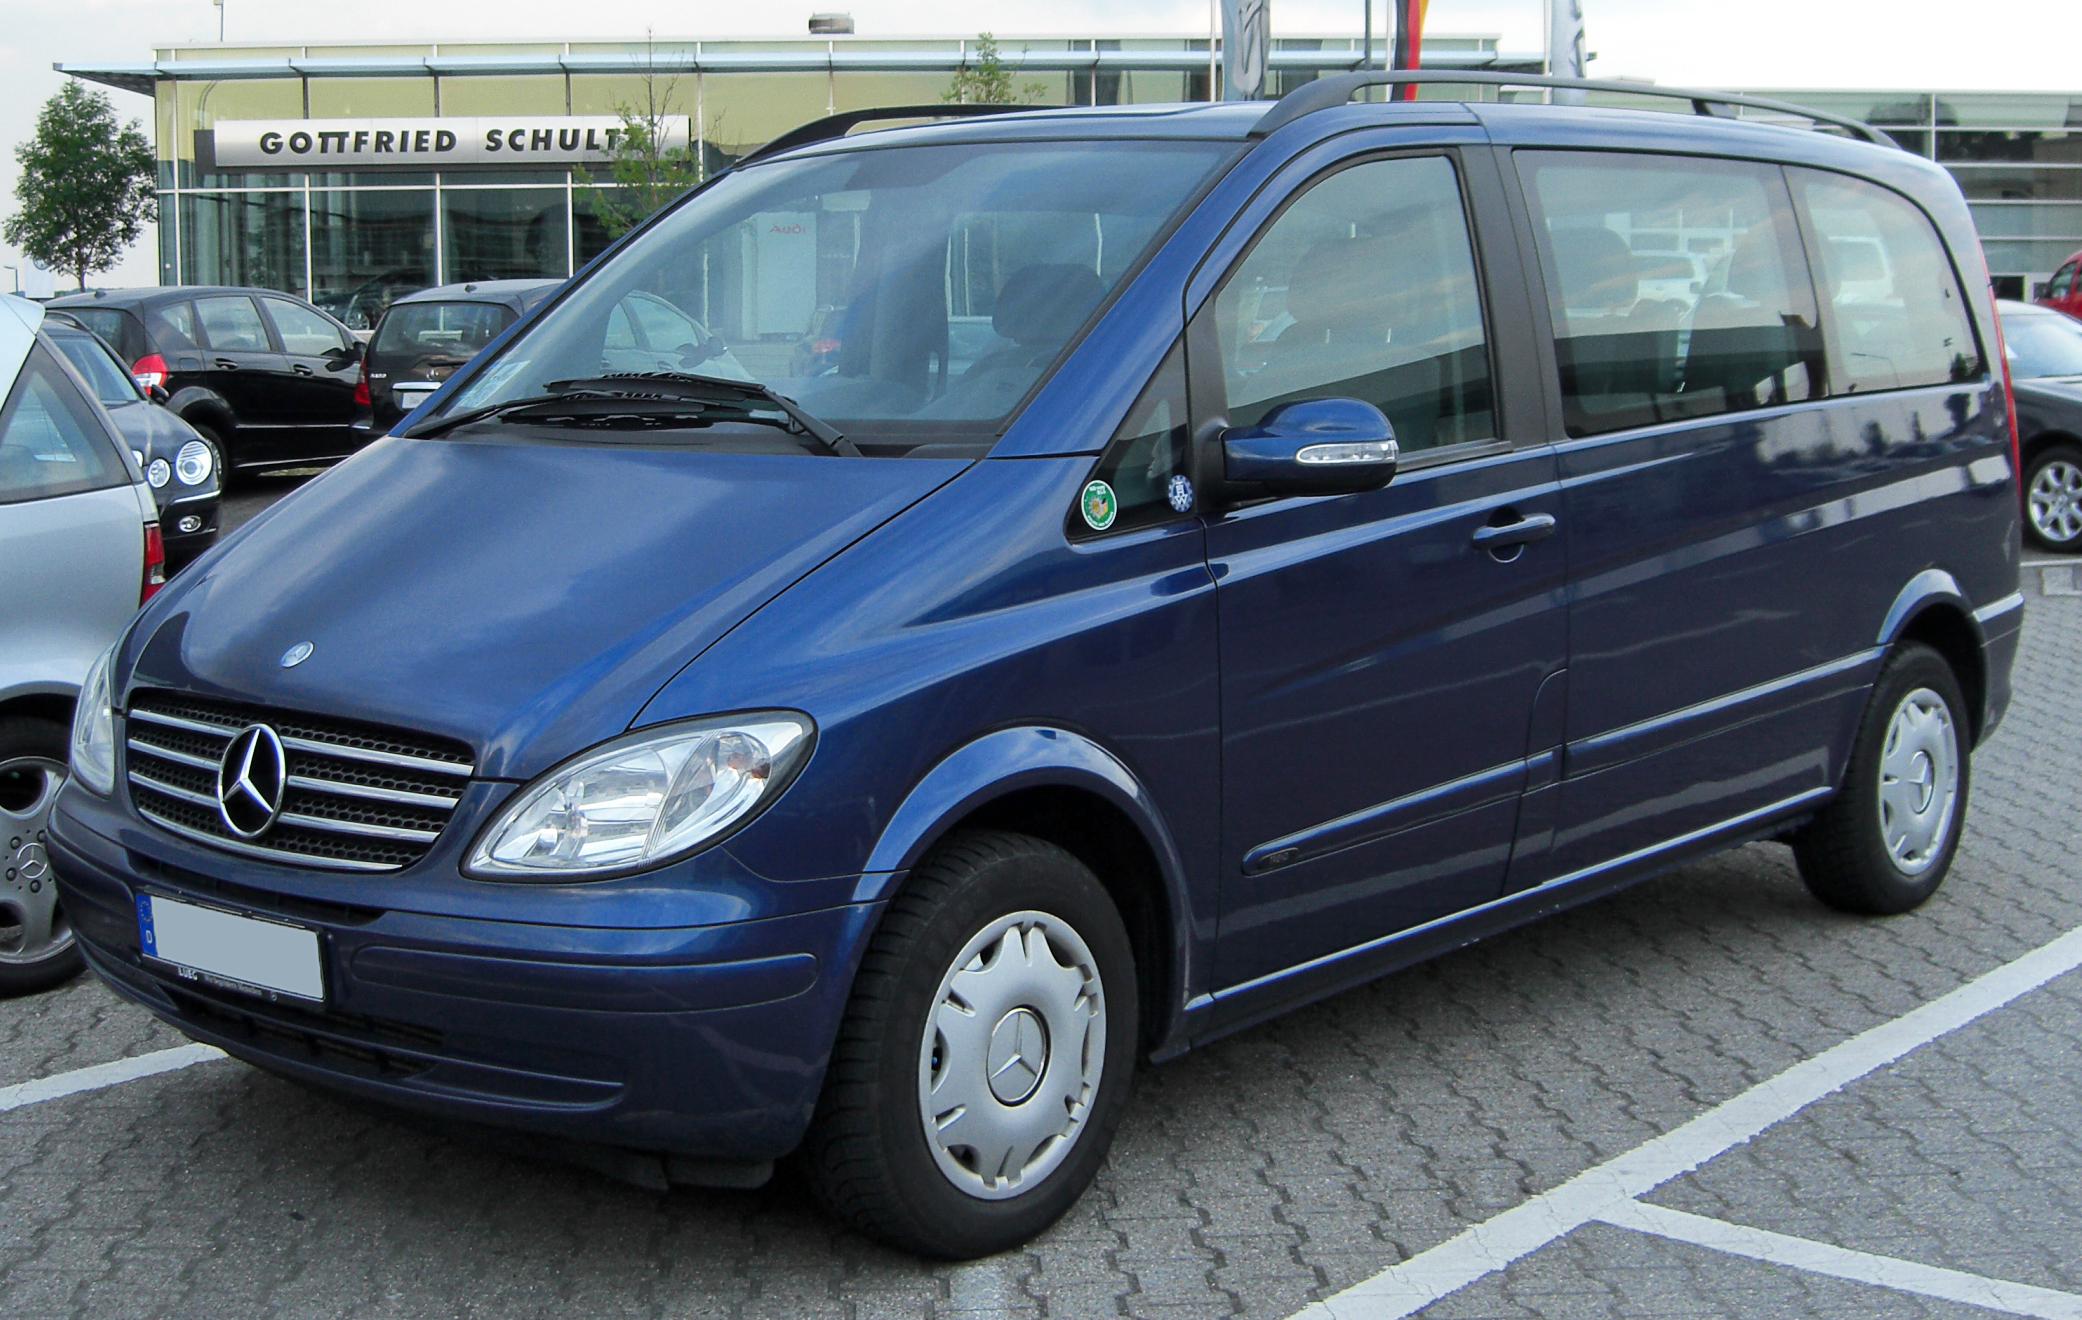 File:Mercedes Viano 2.2 Trend (W639) front 20100630.jpg - Wikimedia Commons